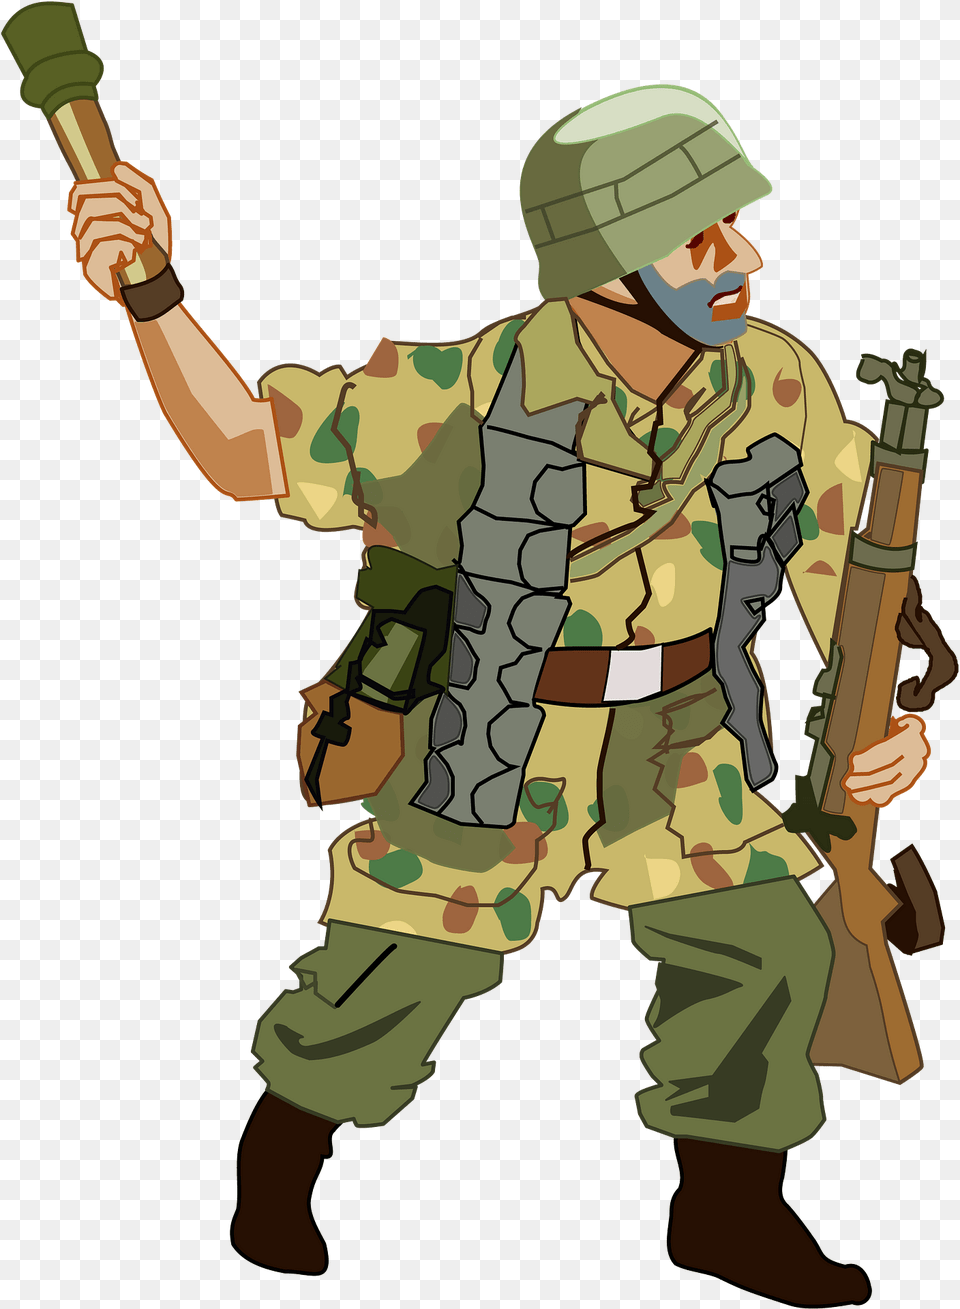 Soldier Throwing Hand Grenade Clipart, Person, Military Uniform, Military, Rifle Png